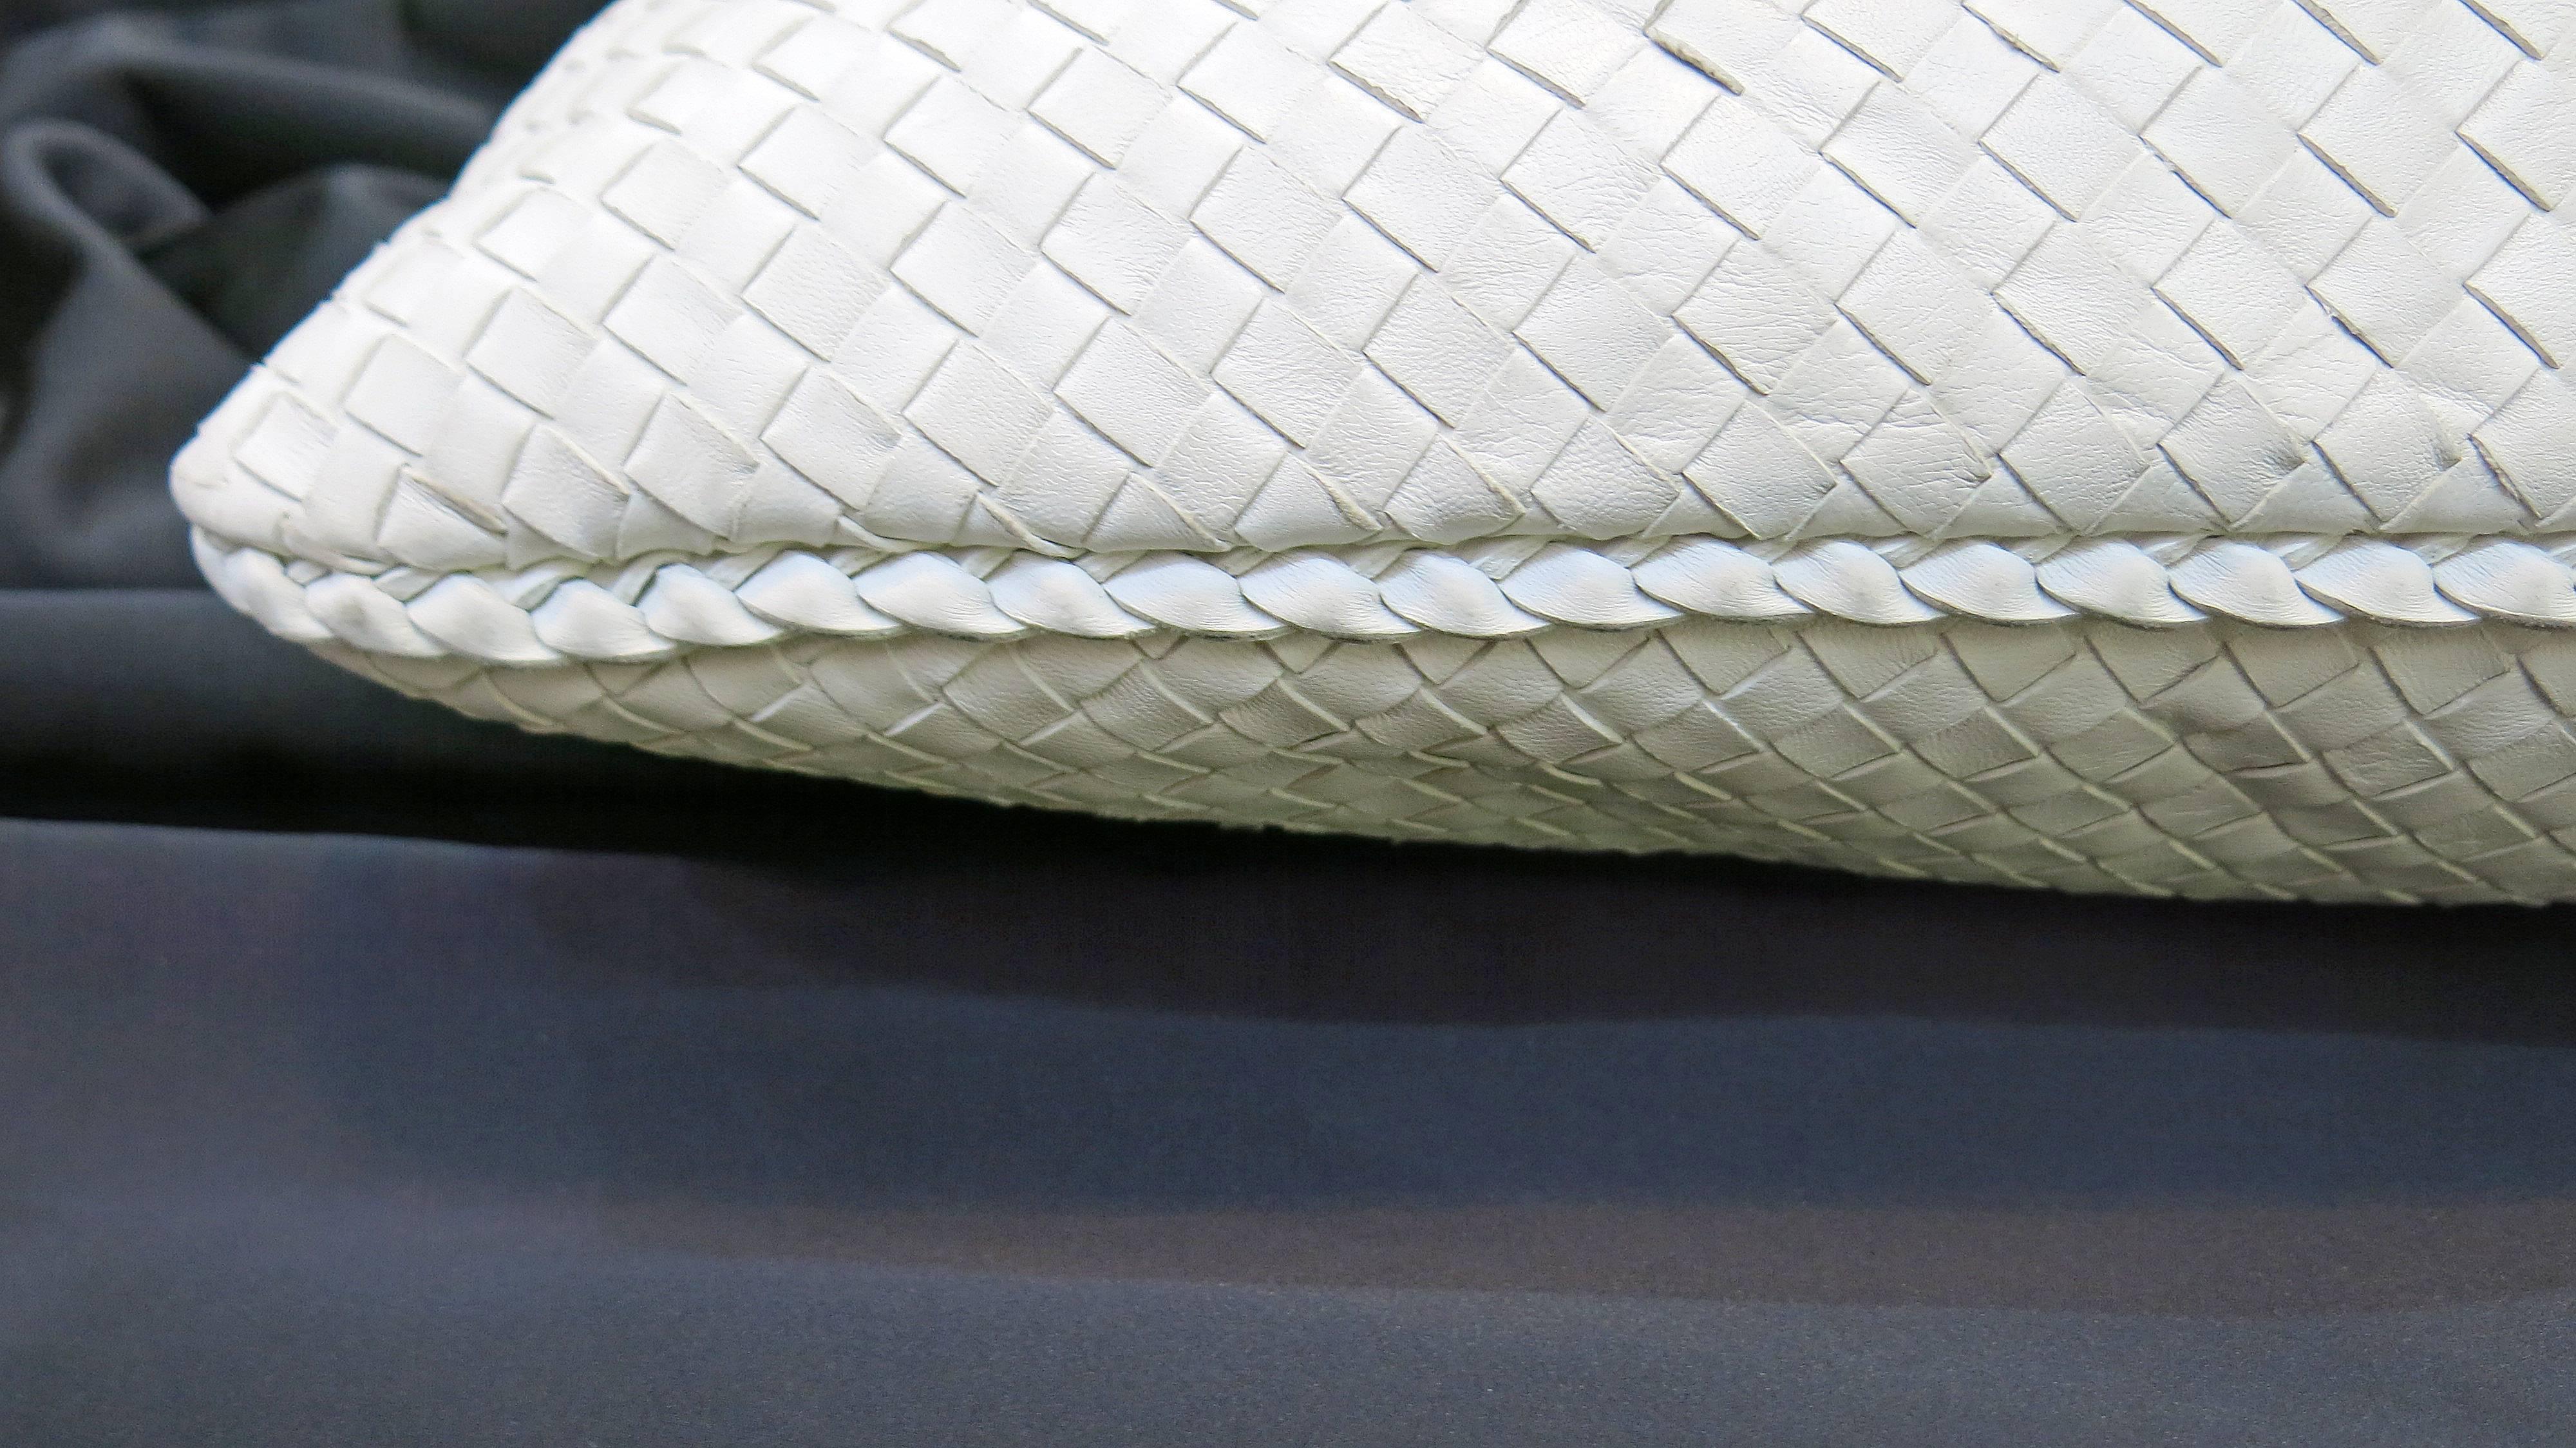 White shoulder bag in the classic woven leather style Bottega Veneta made a name for themselves with. Bottega pieces always feature the most beautiful, softest leather. The bag is handstitched and has braiding at the handle and around the edge of